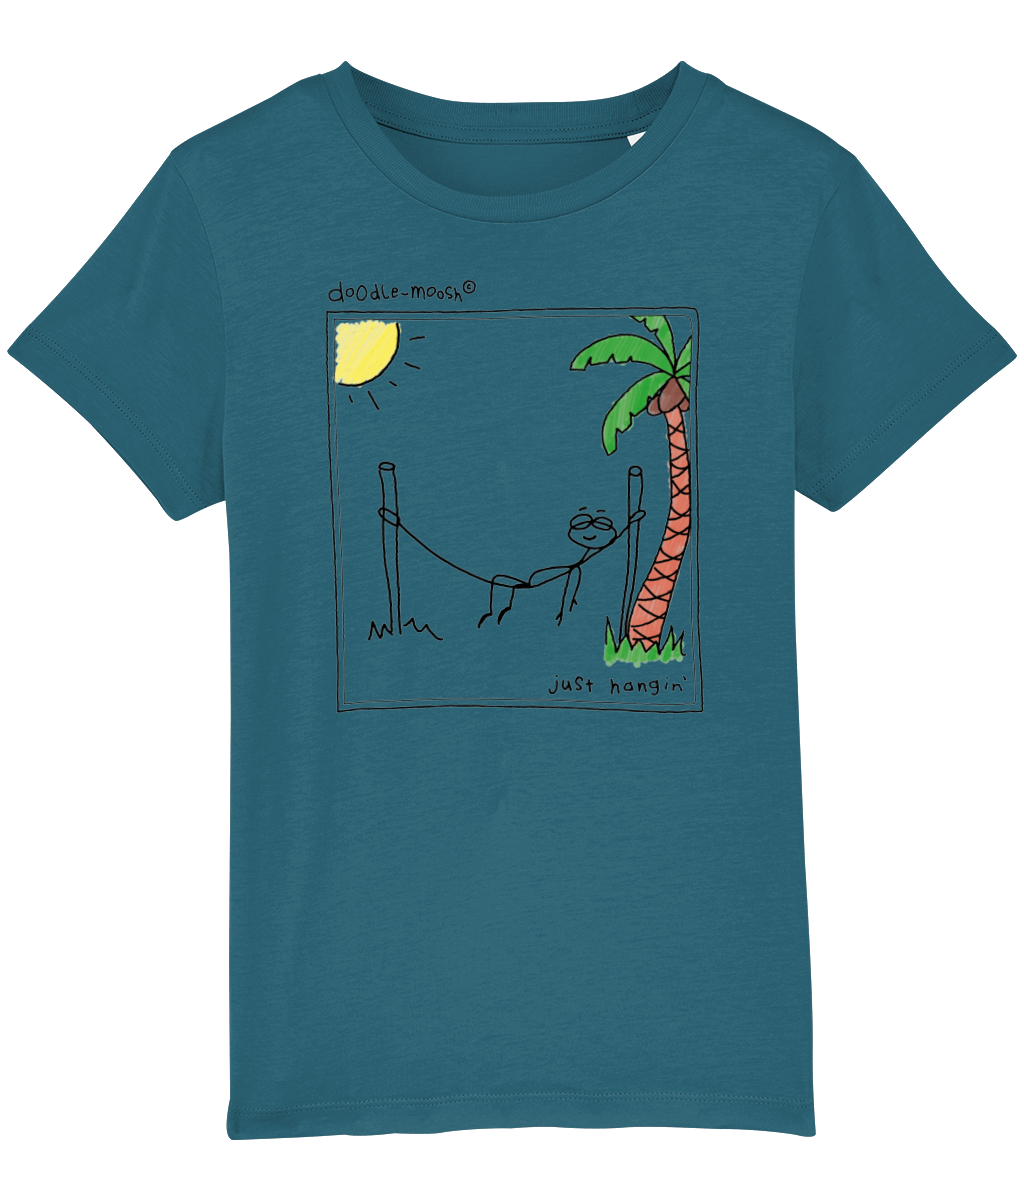 Just hanging t-shirt, blue with black, colourful drawing